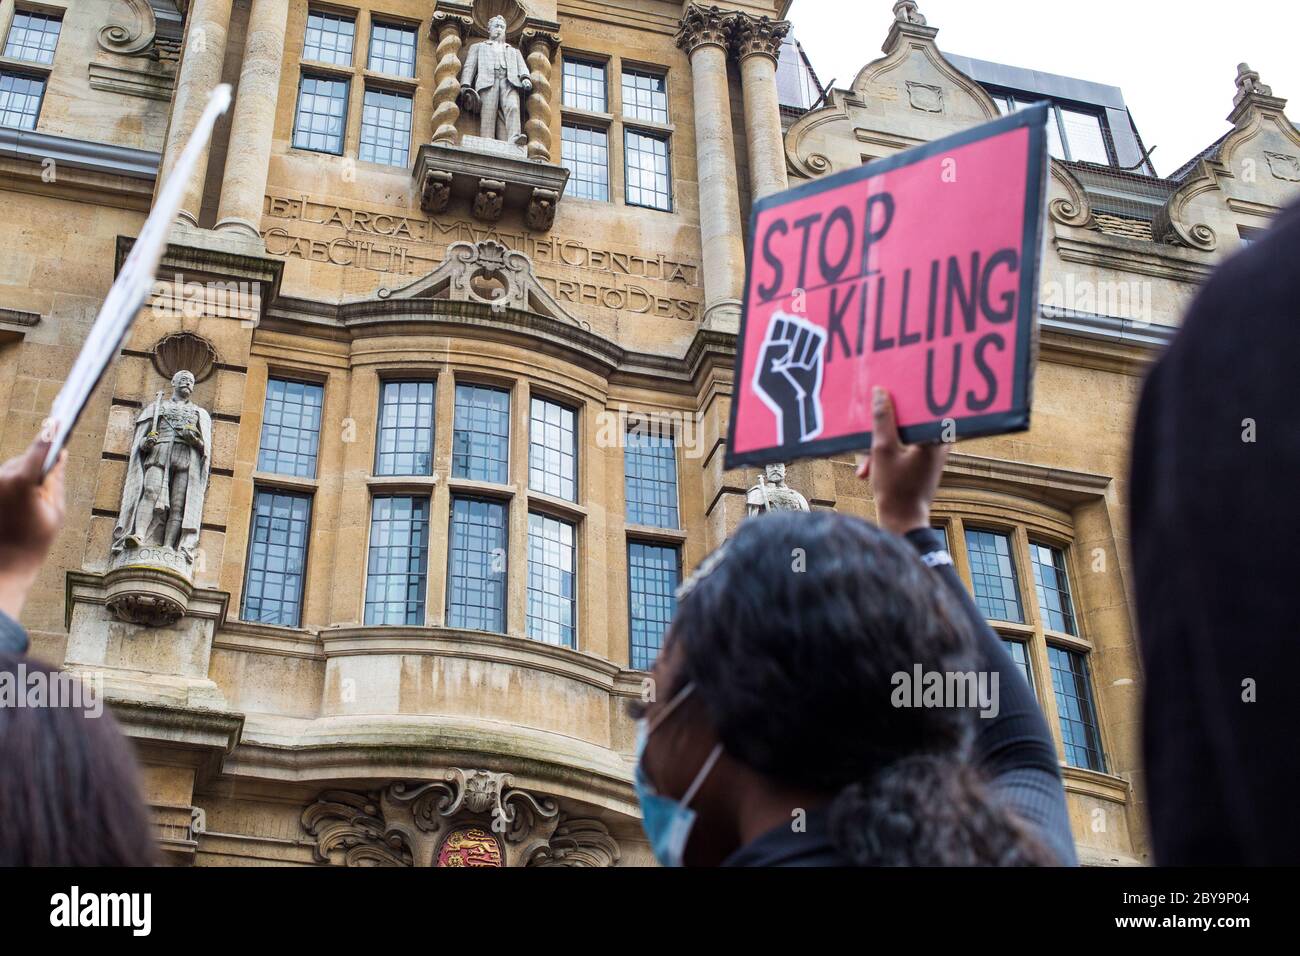 Oxford UK 9th June 2020 people outside the front of Oriel College to demand the removal of the Rhodes statue. Credit: Thabo Jaiyesimi/Alamy Live News Stock Photo